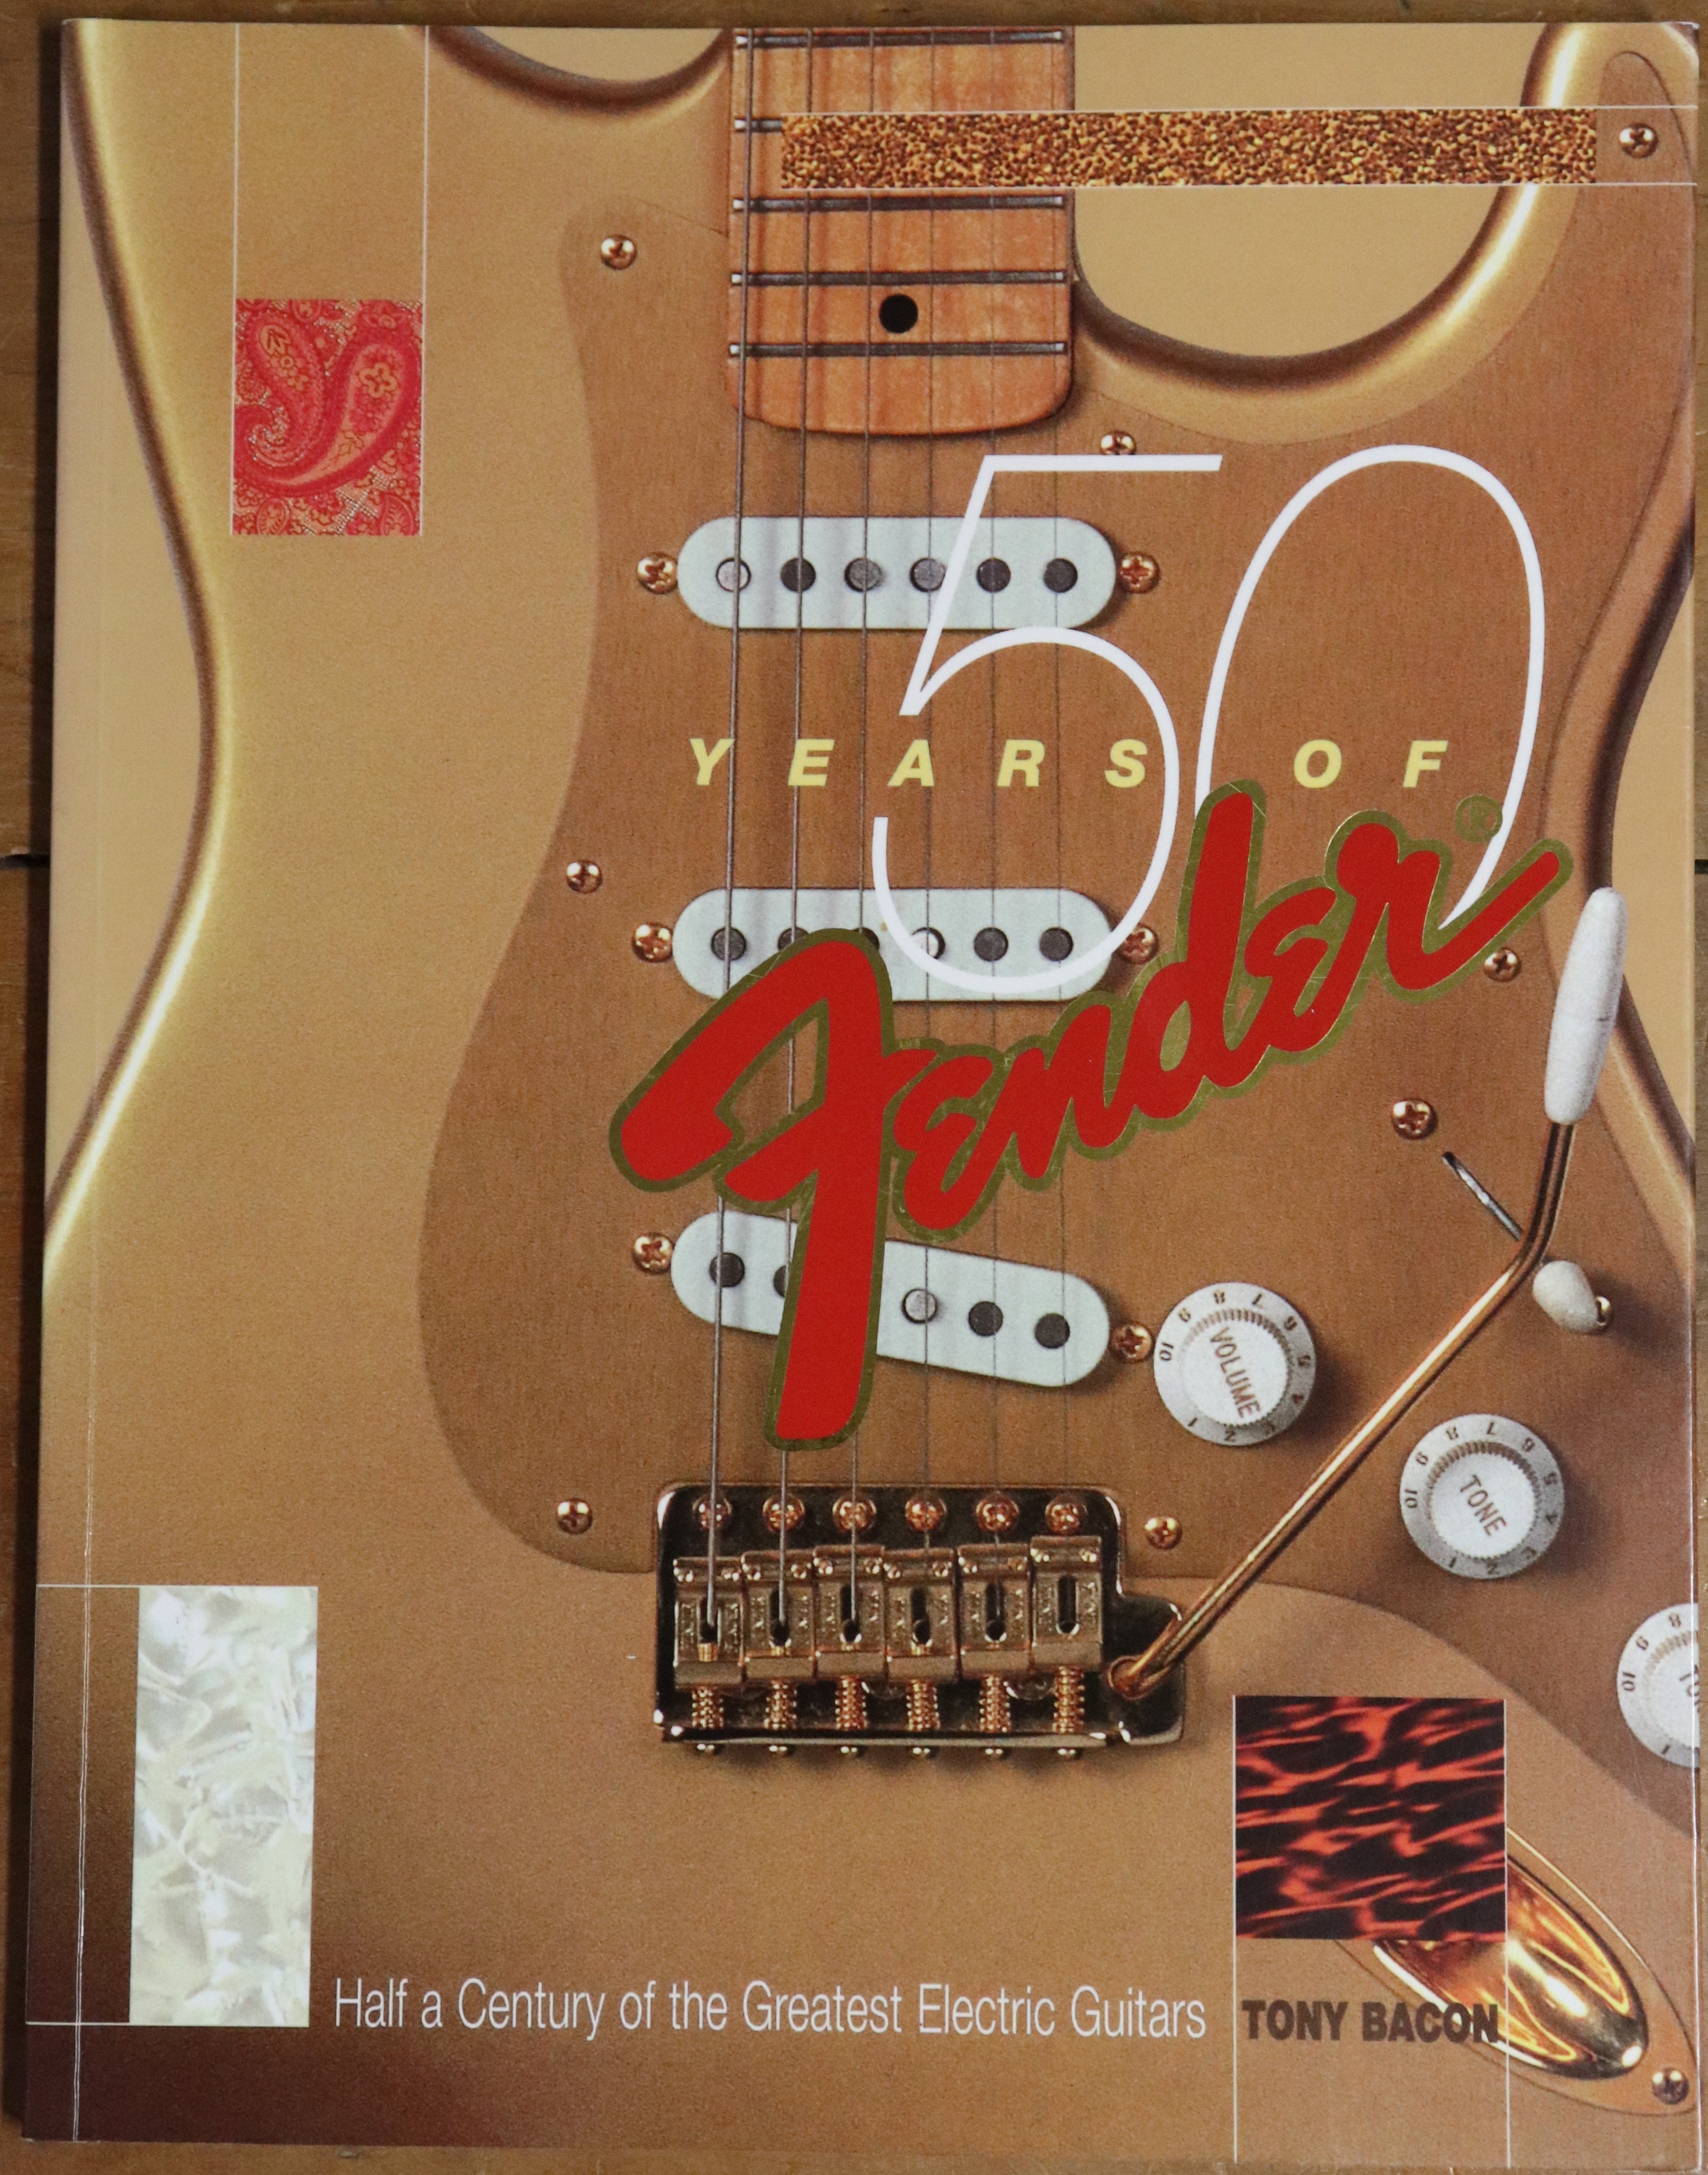 50 Years Of Fender by Tony Bacon - 2005 - Fender Guitar Reference Book